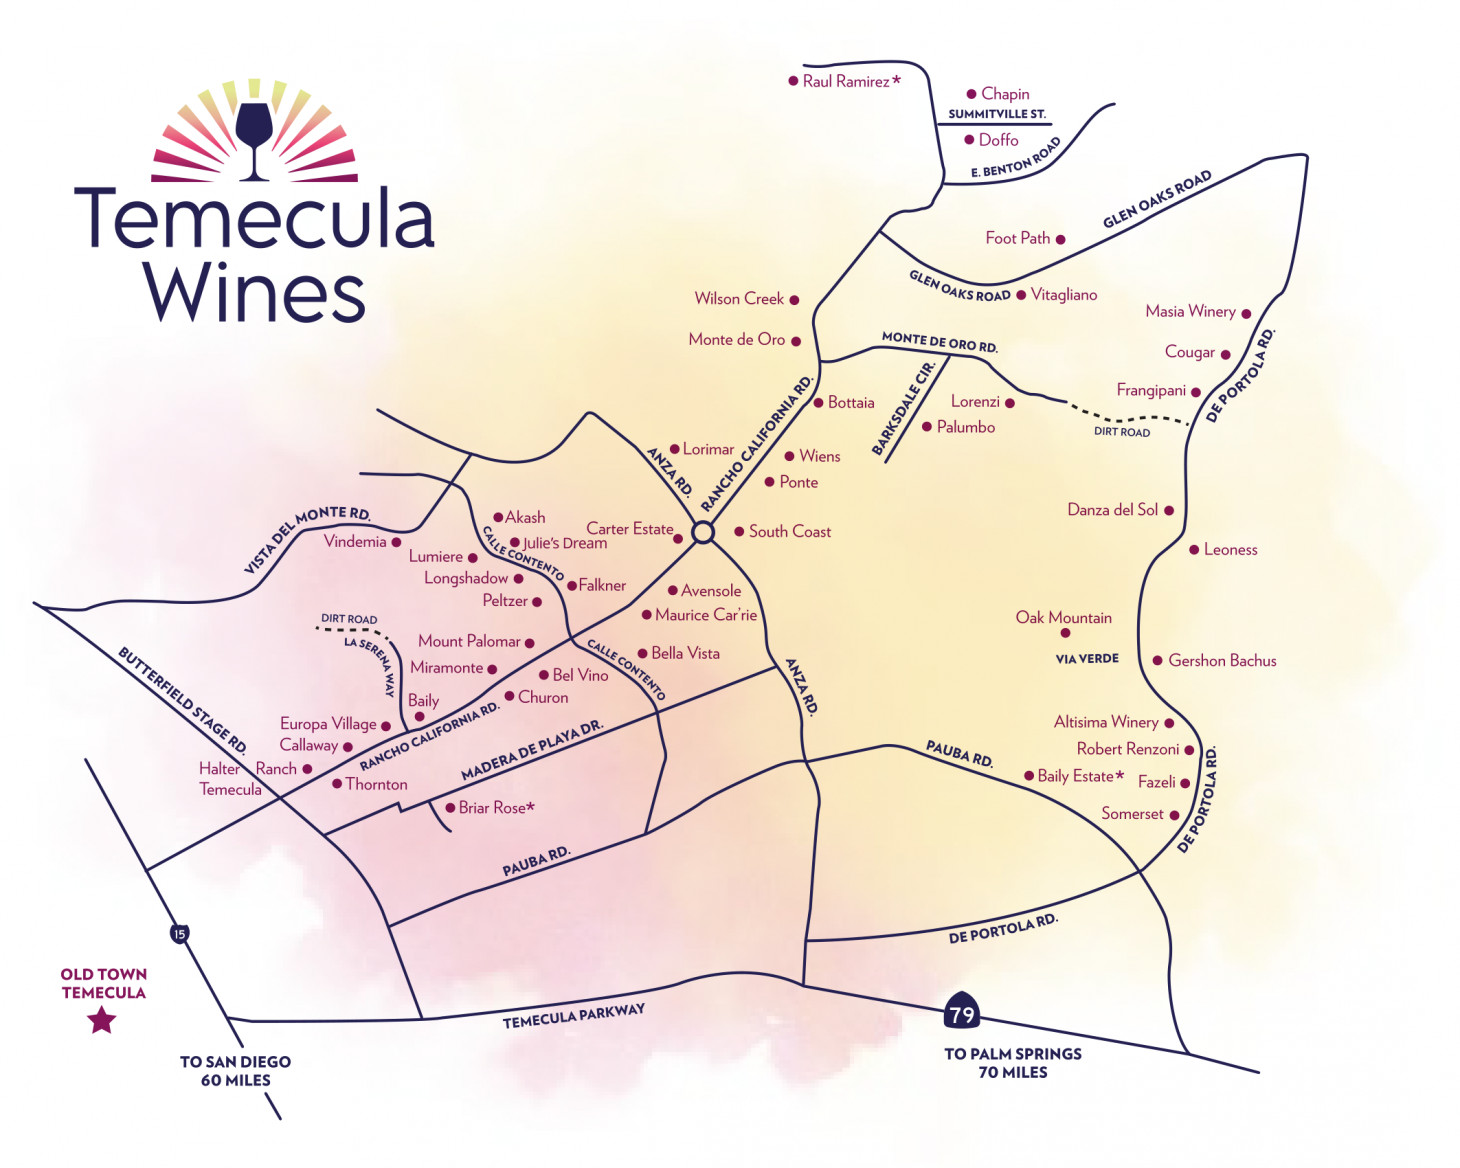 Temecula Valley Winery Map